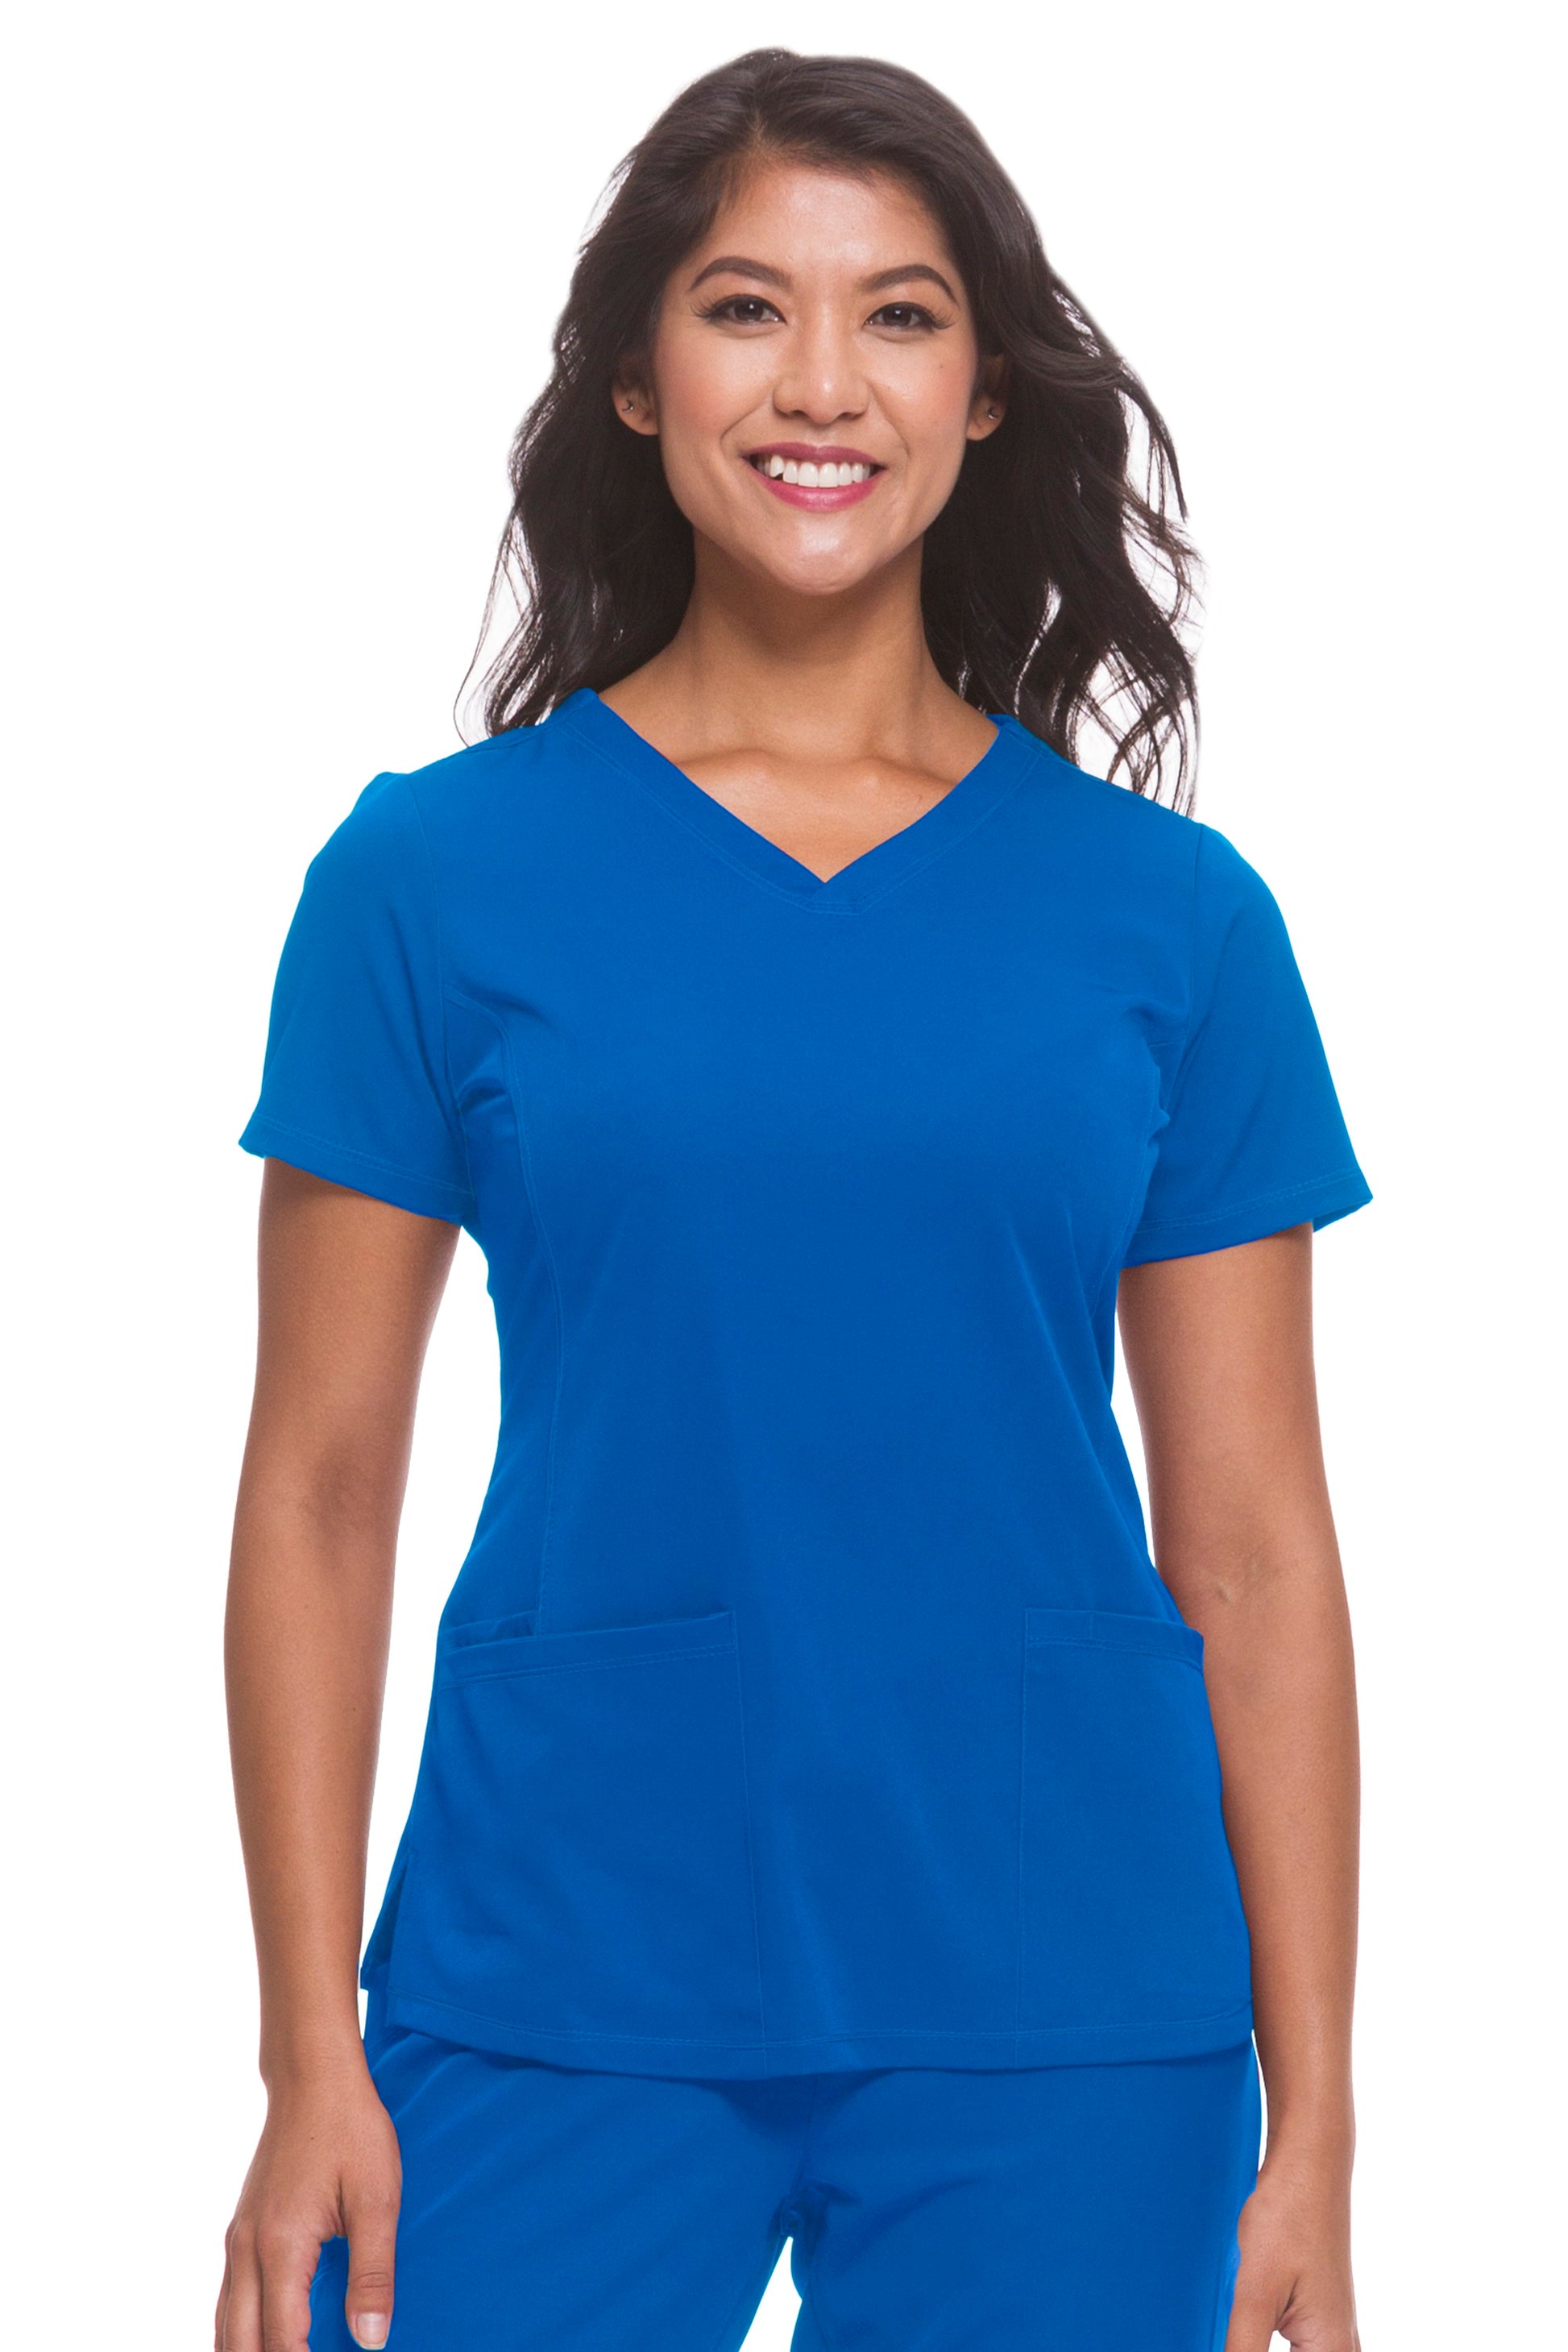 Healing Hands HH Works Monica V-Neck Scrub Top in Royal at Parker's Clothing and Shoes